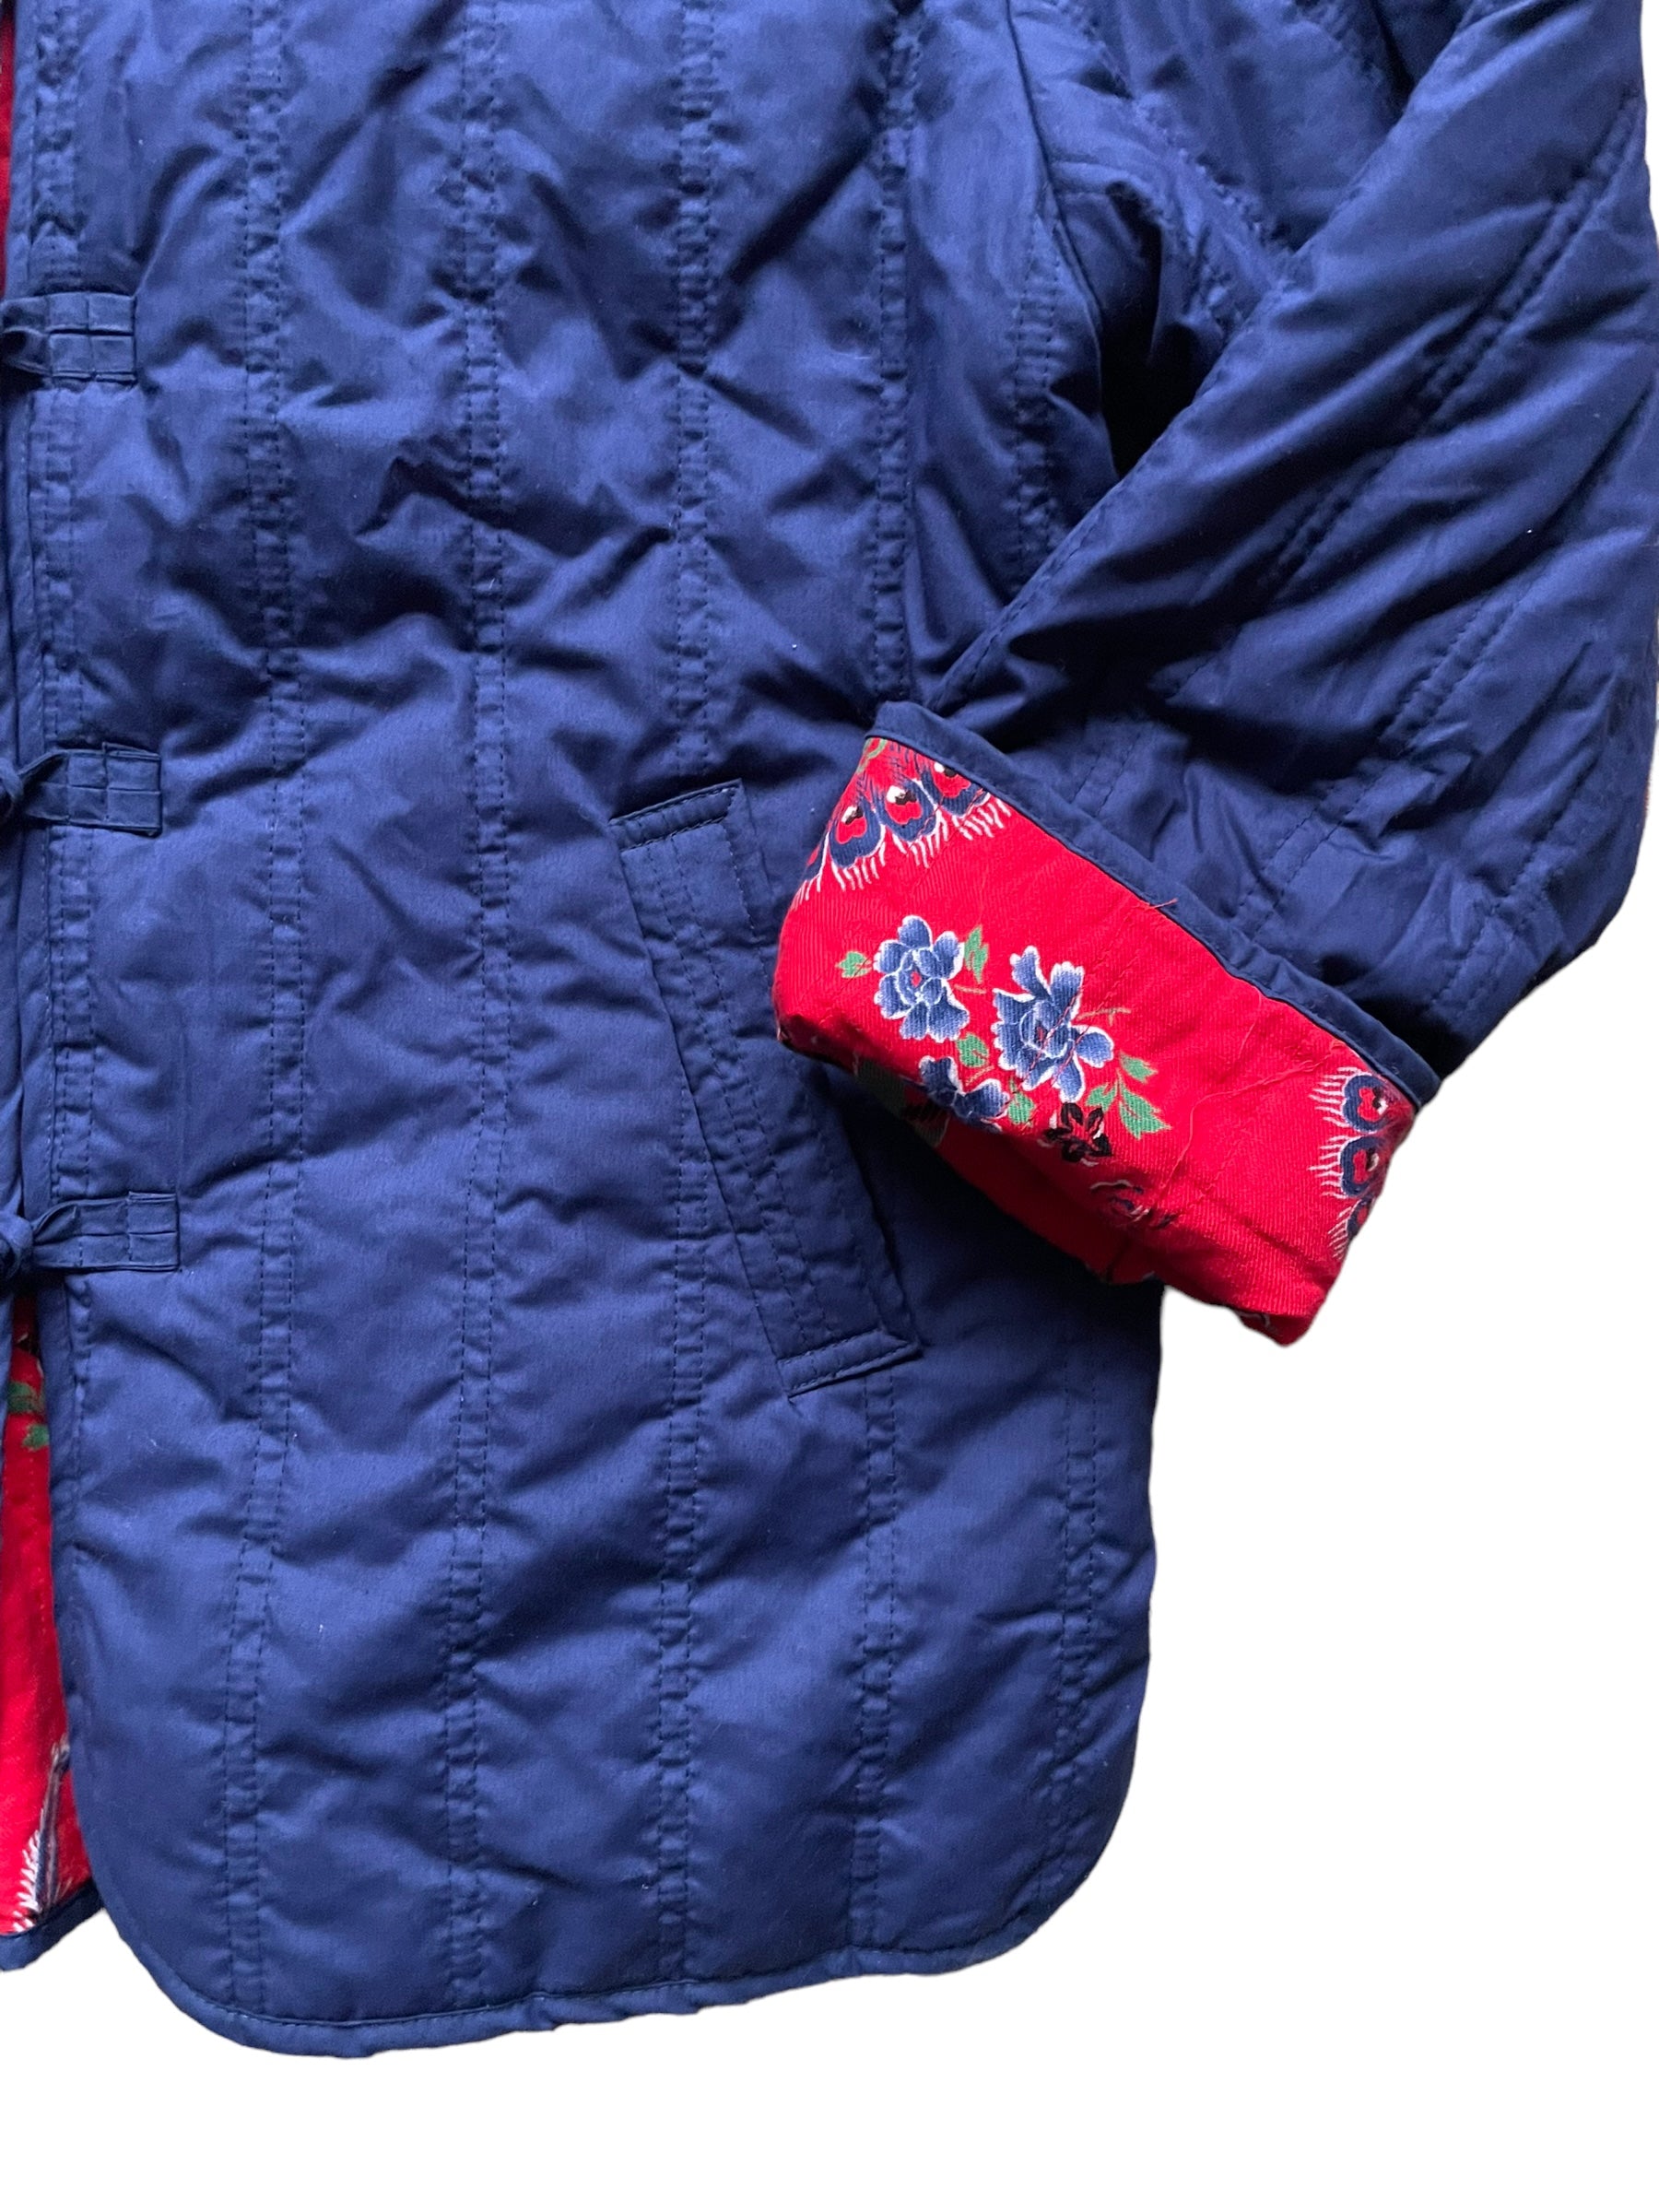 Blue side pocket view of Quilted Reversible Cheongsam Style Jacket SZ L-XL | Seattle Vintage Jackets | Barn Owl Vintage